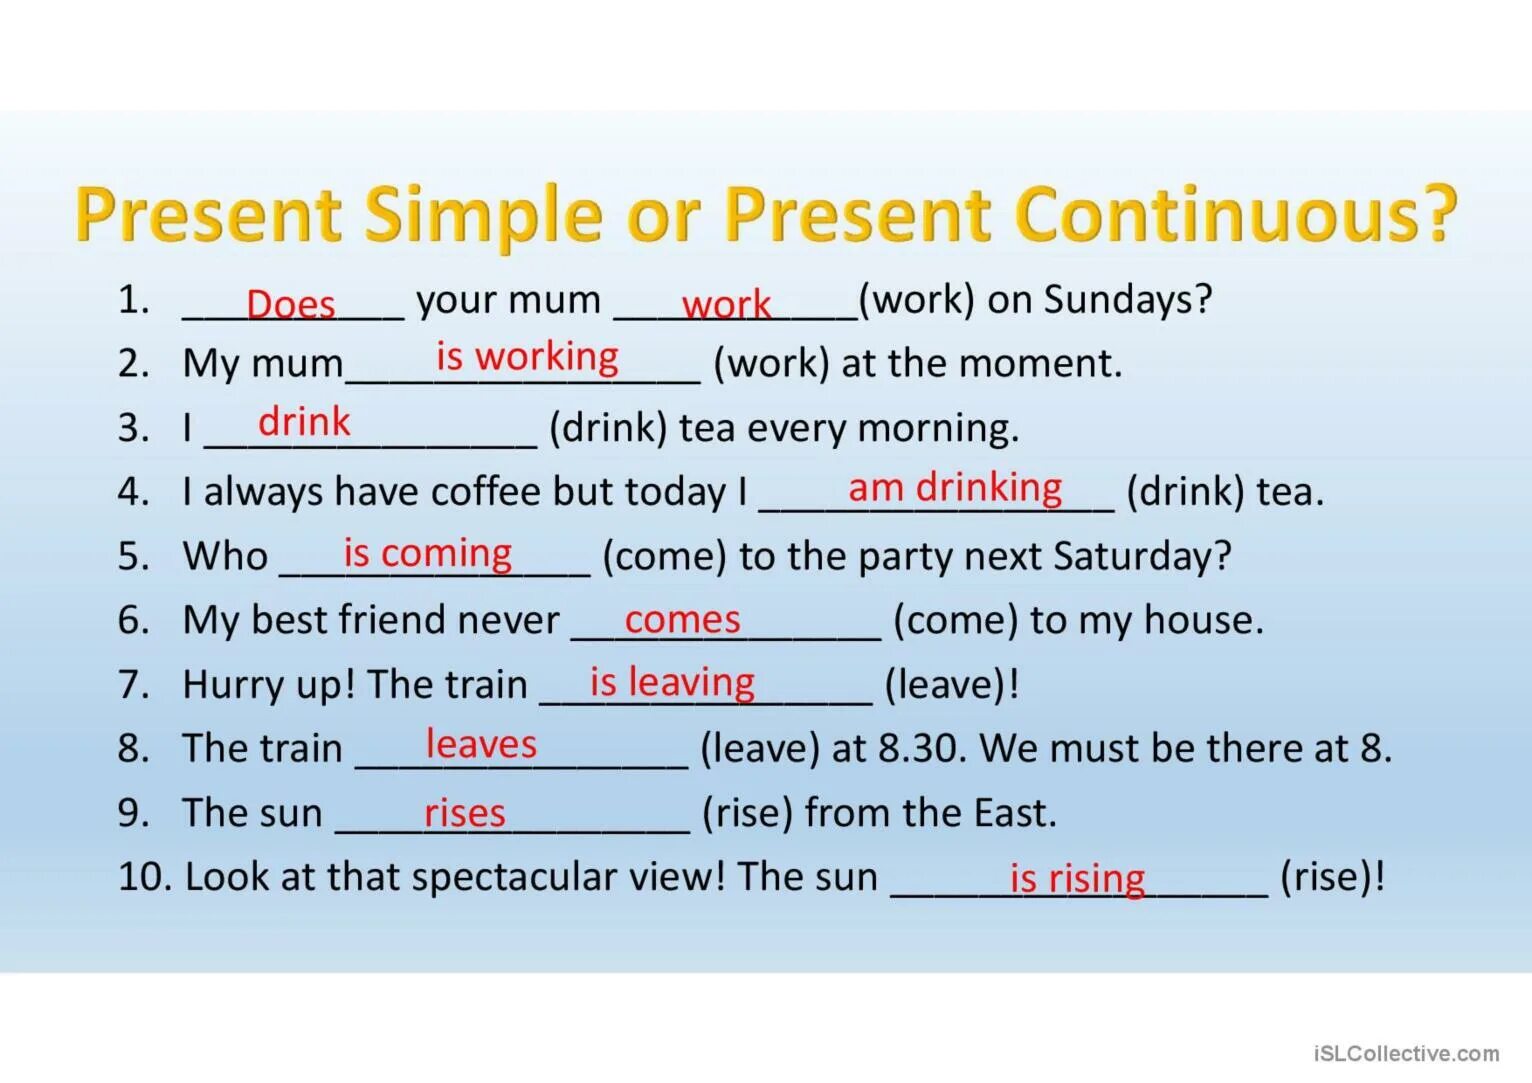 Present cont wordwall. Present simple Tense present Continuous Tense. Present simple present Continuous разница. Present simple with present Continuous. Present simple vs present Continuous vs past simple Worksheets.